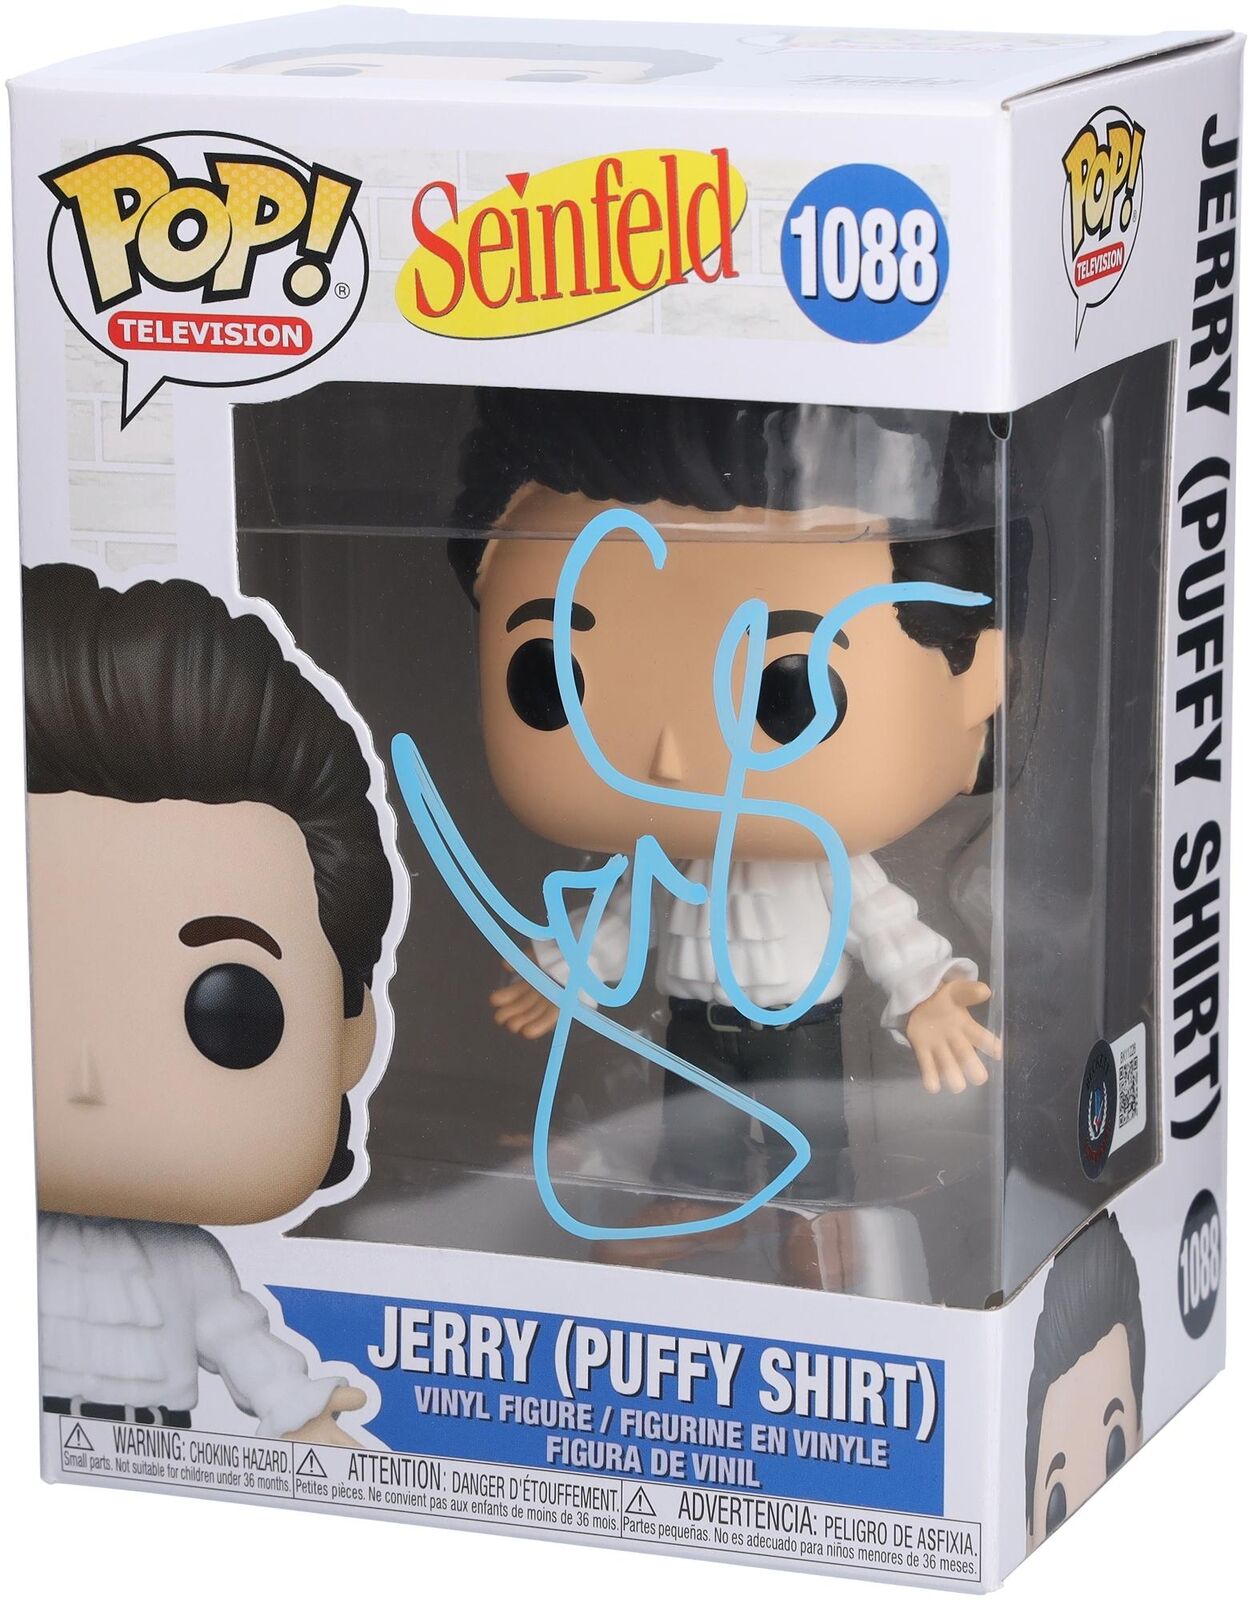 Jerry Seinfeld Autographed #1088 Funko Pop Signed in Light Blue Ink BAS